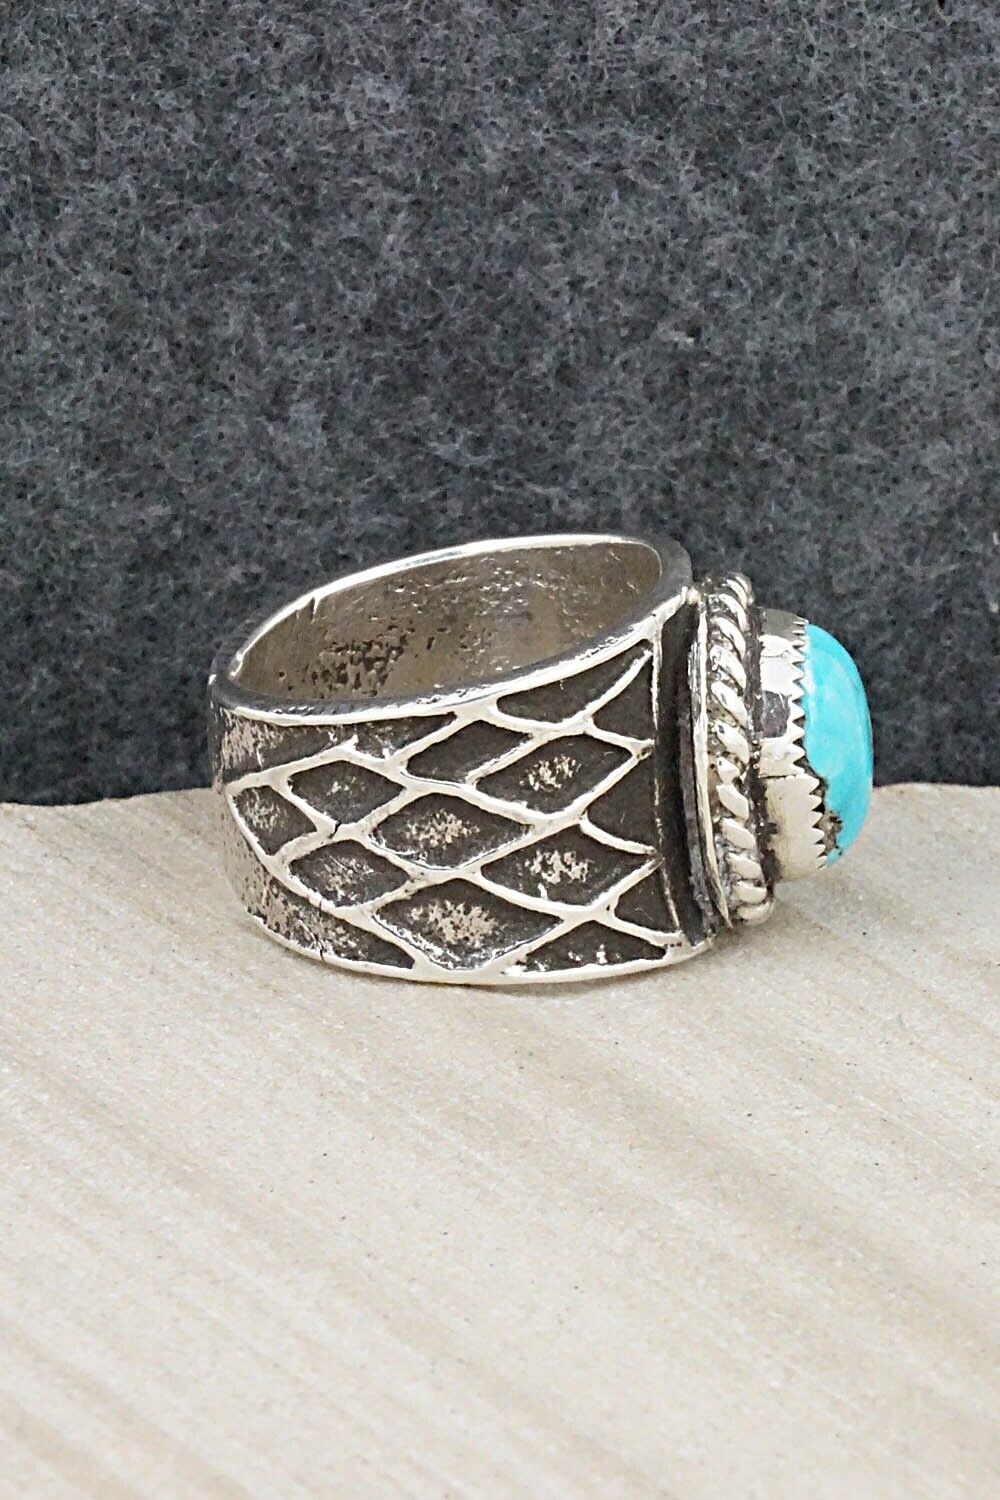 Turquoise & Sterling Silver Ring - Delbert Arviso - Size 10.5